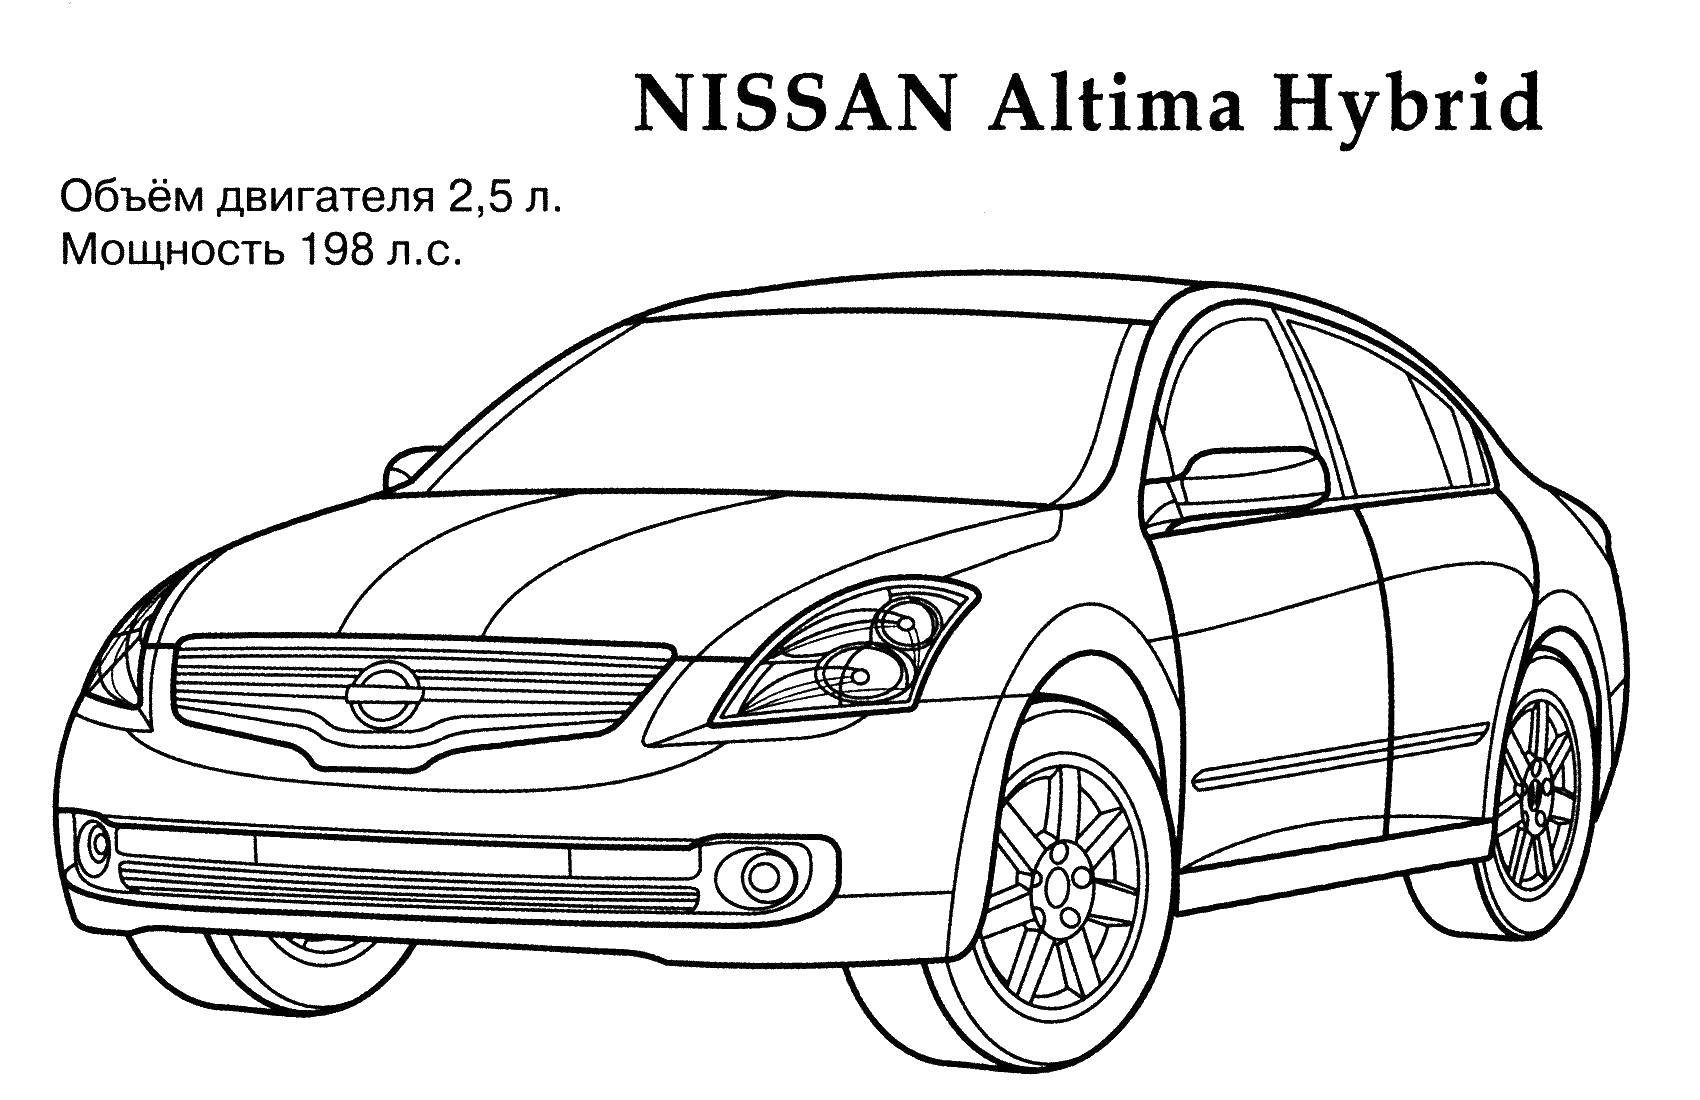 Coloring Nissan. Category machine . Tags:  Nissan, cars, wheels.